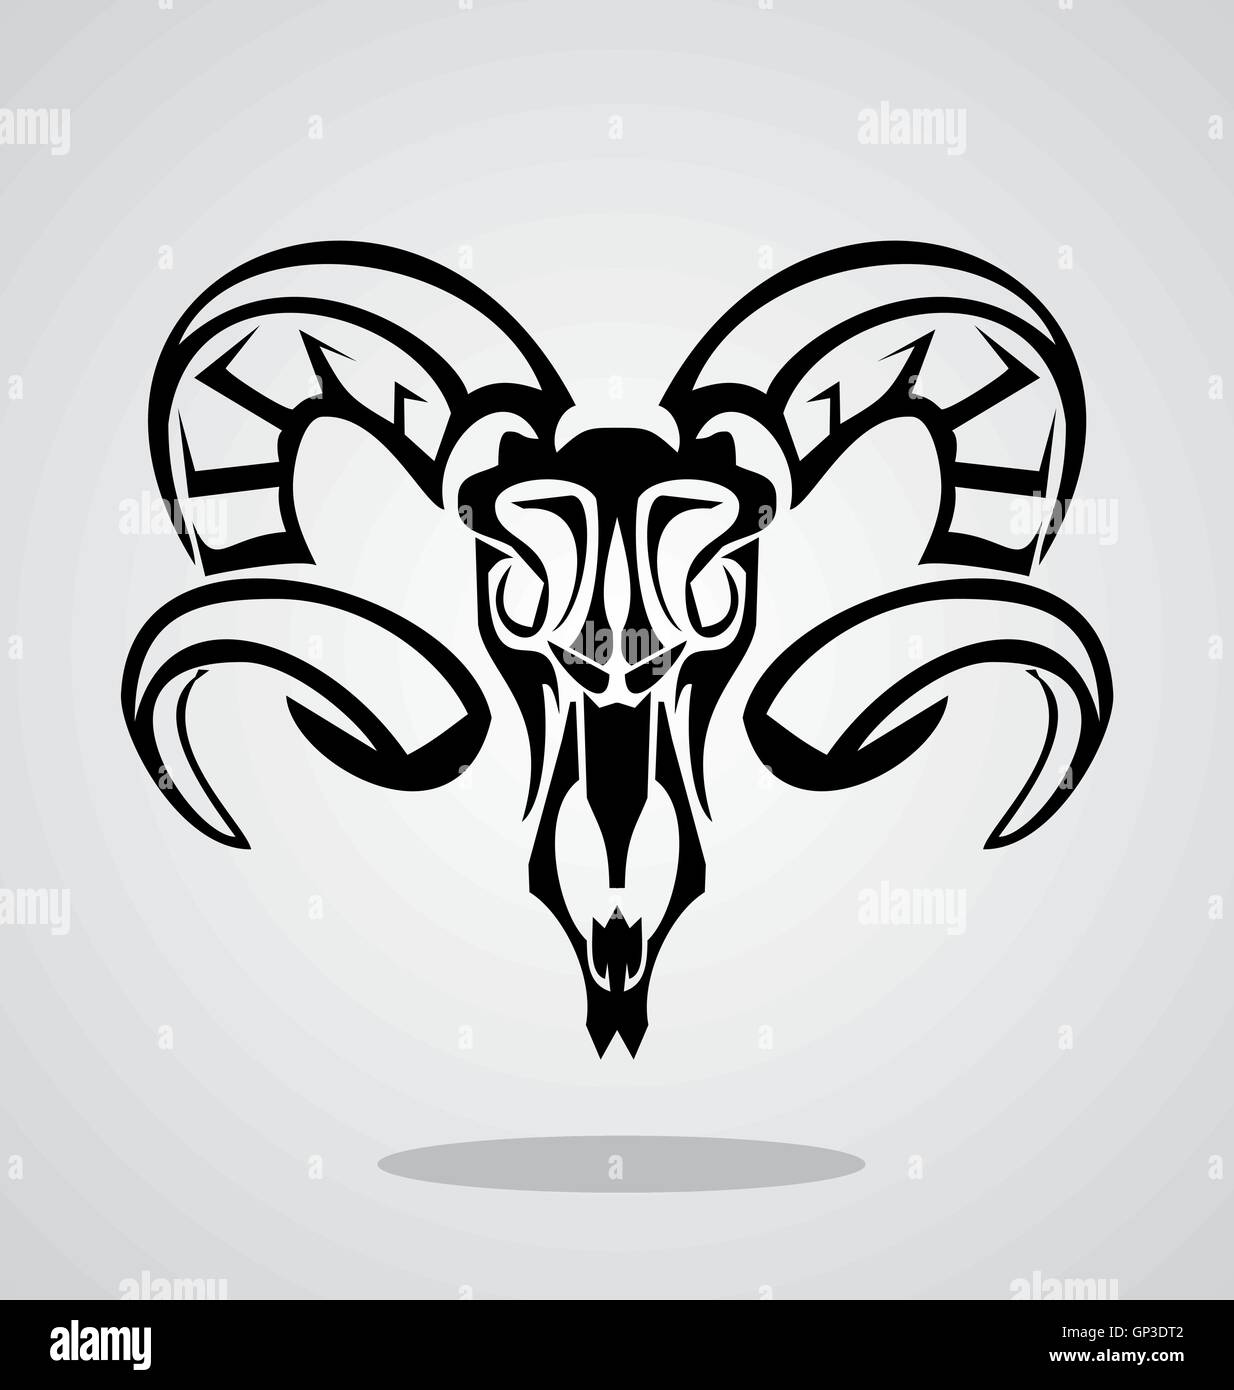 Aries Sign Tribal Stock Vector